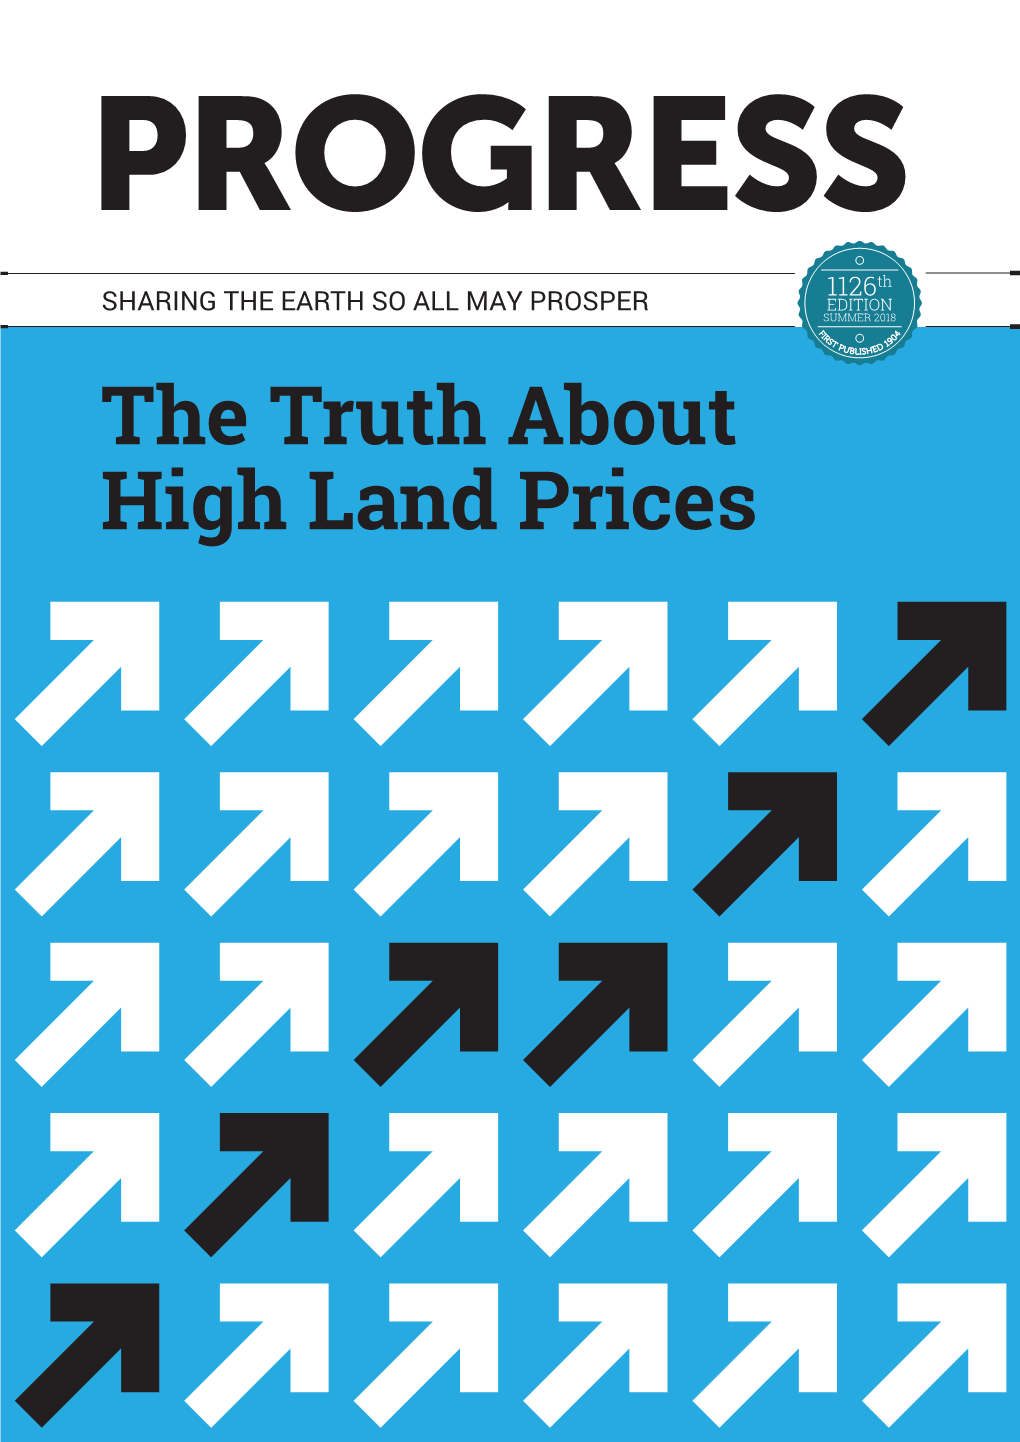 The Truth About High Land Prices